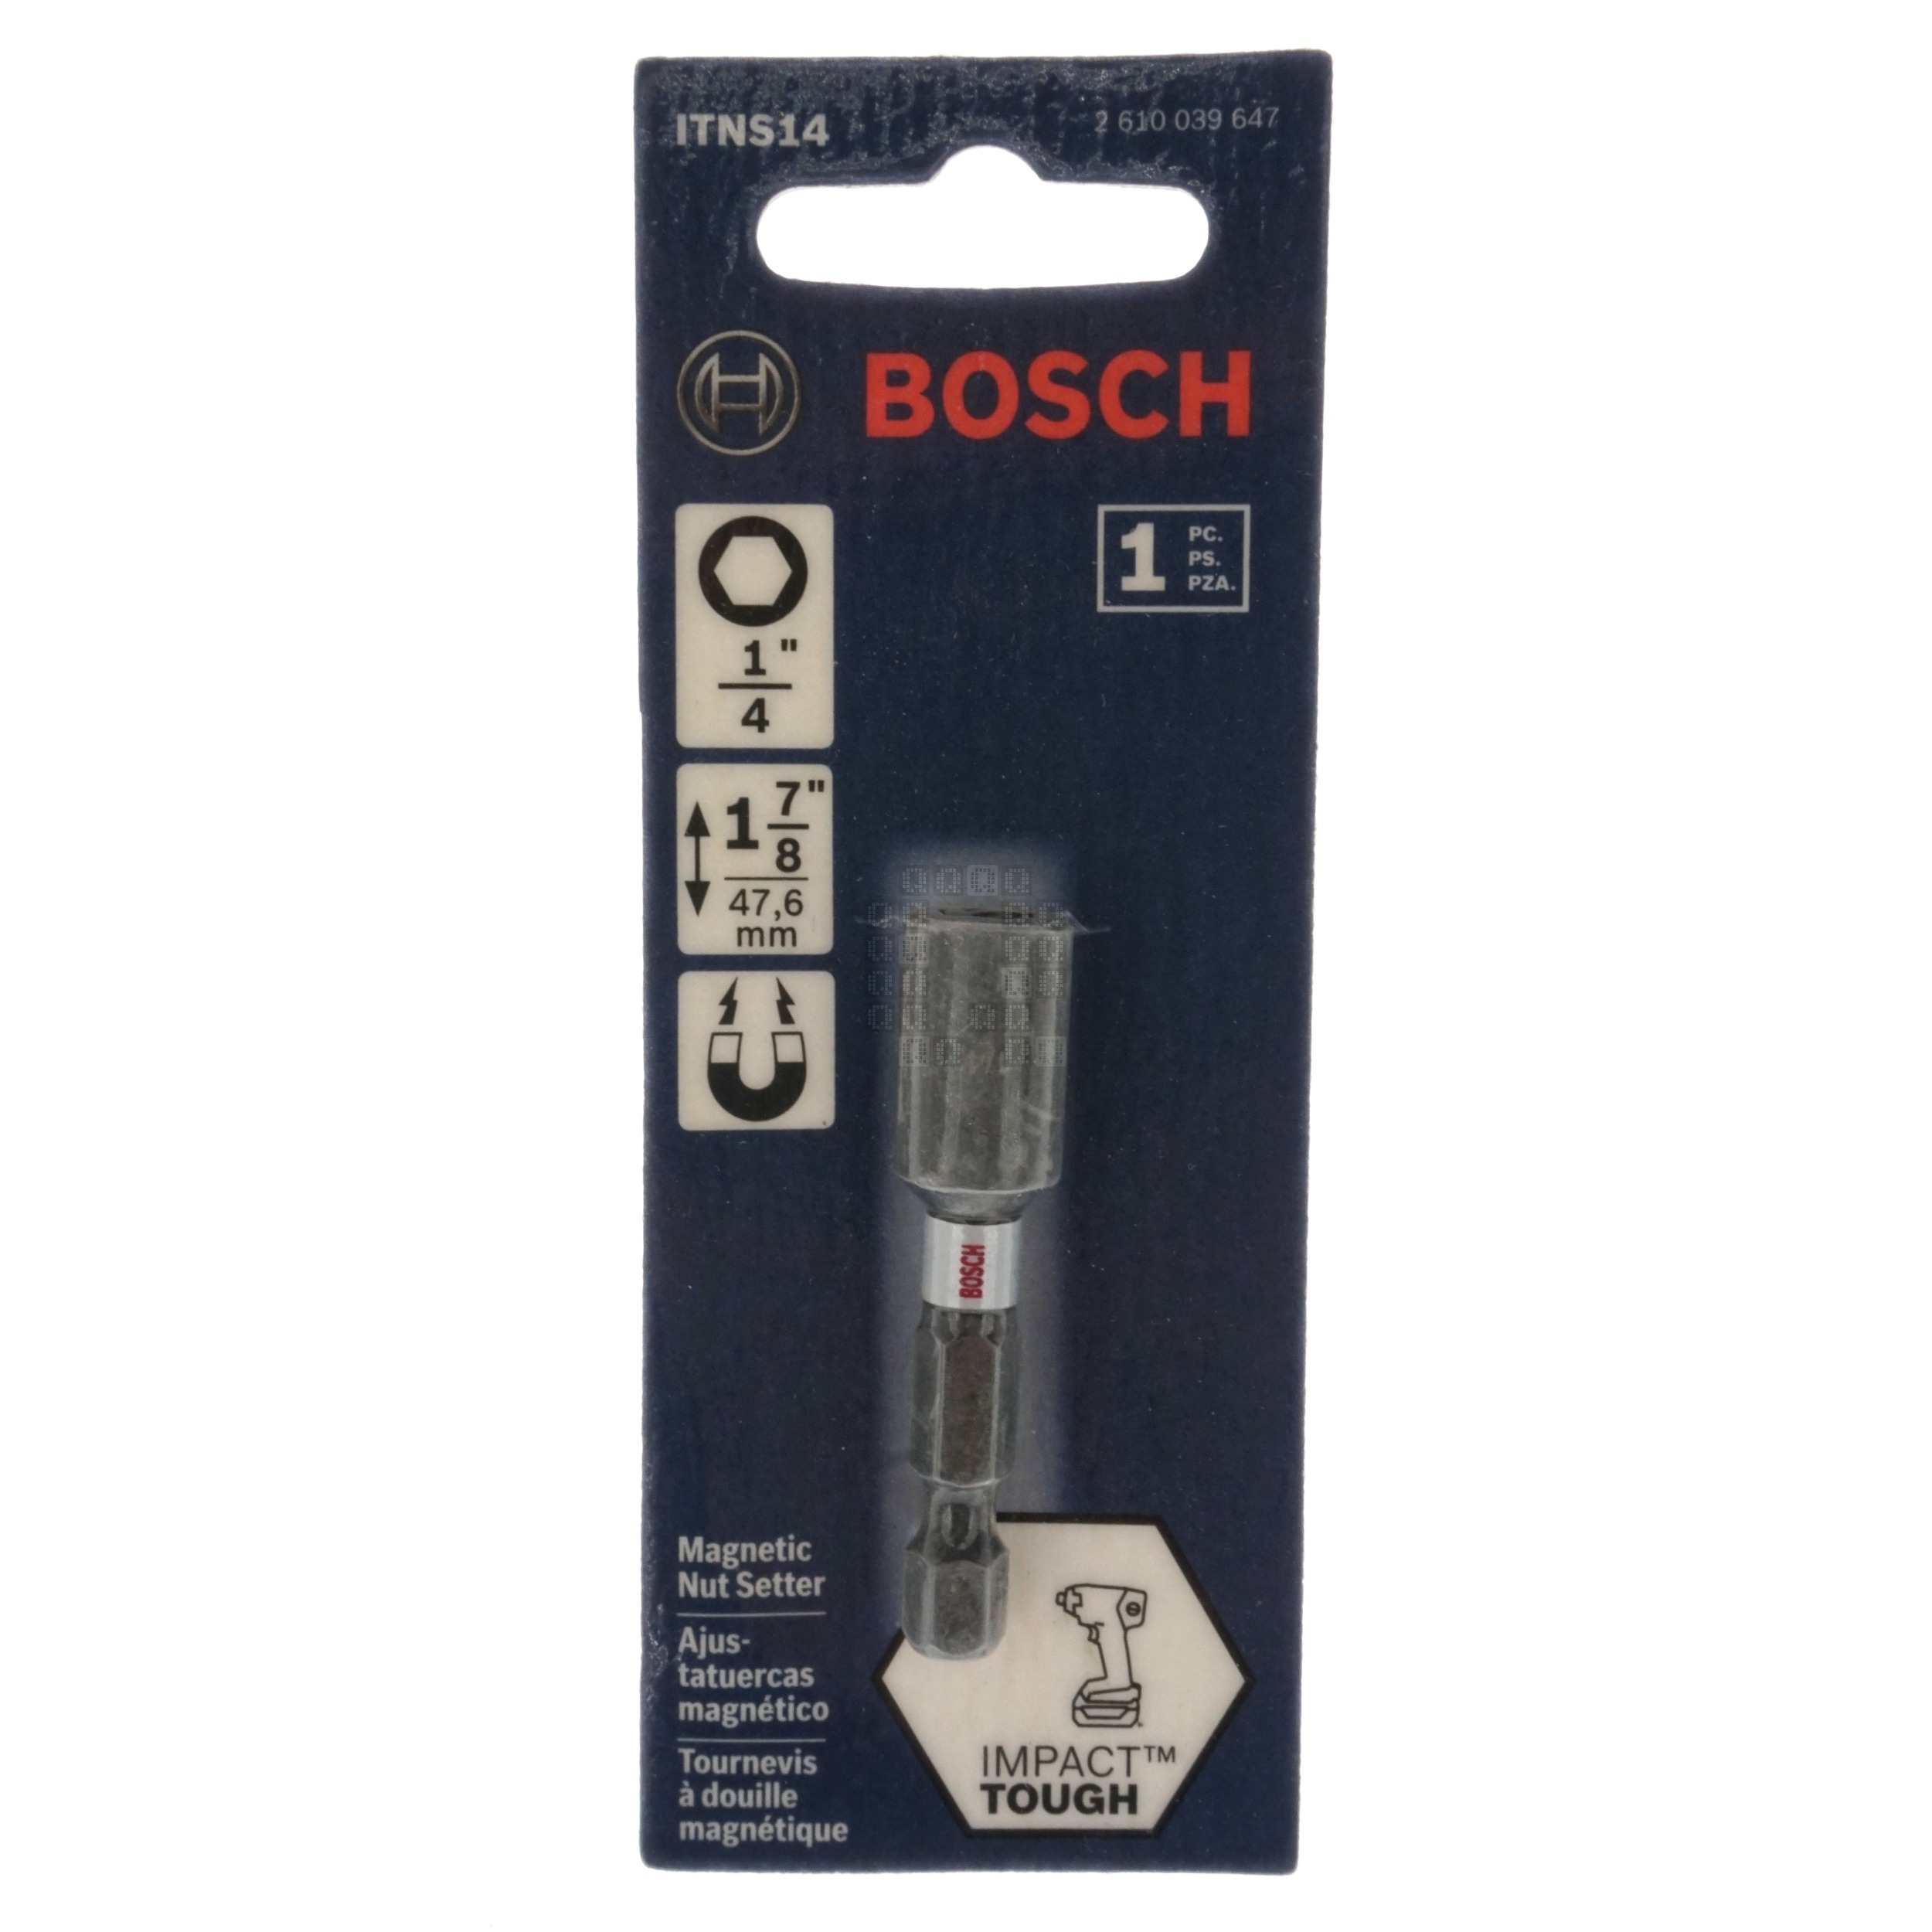 Bosch 2610039647 Impact Tough 1/4" Hex Magnetic Nut Setter, 1-7/8" Length, ITNS14